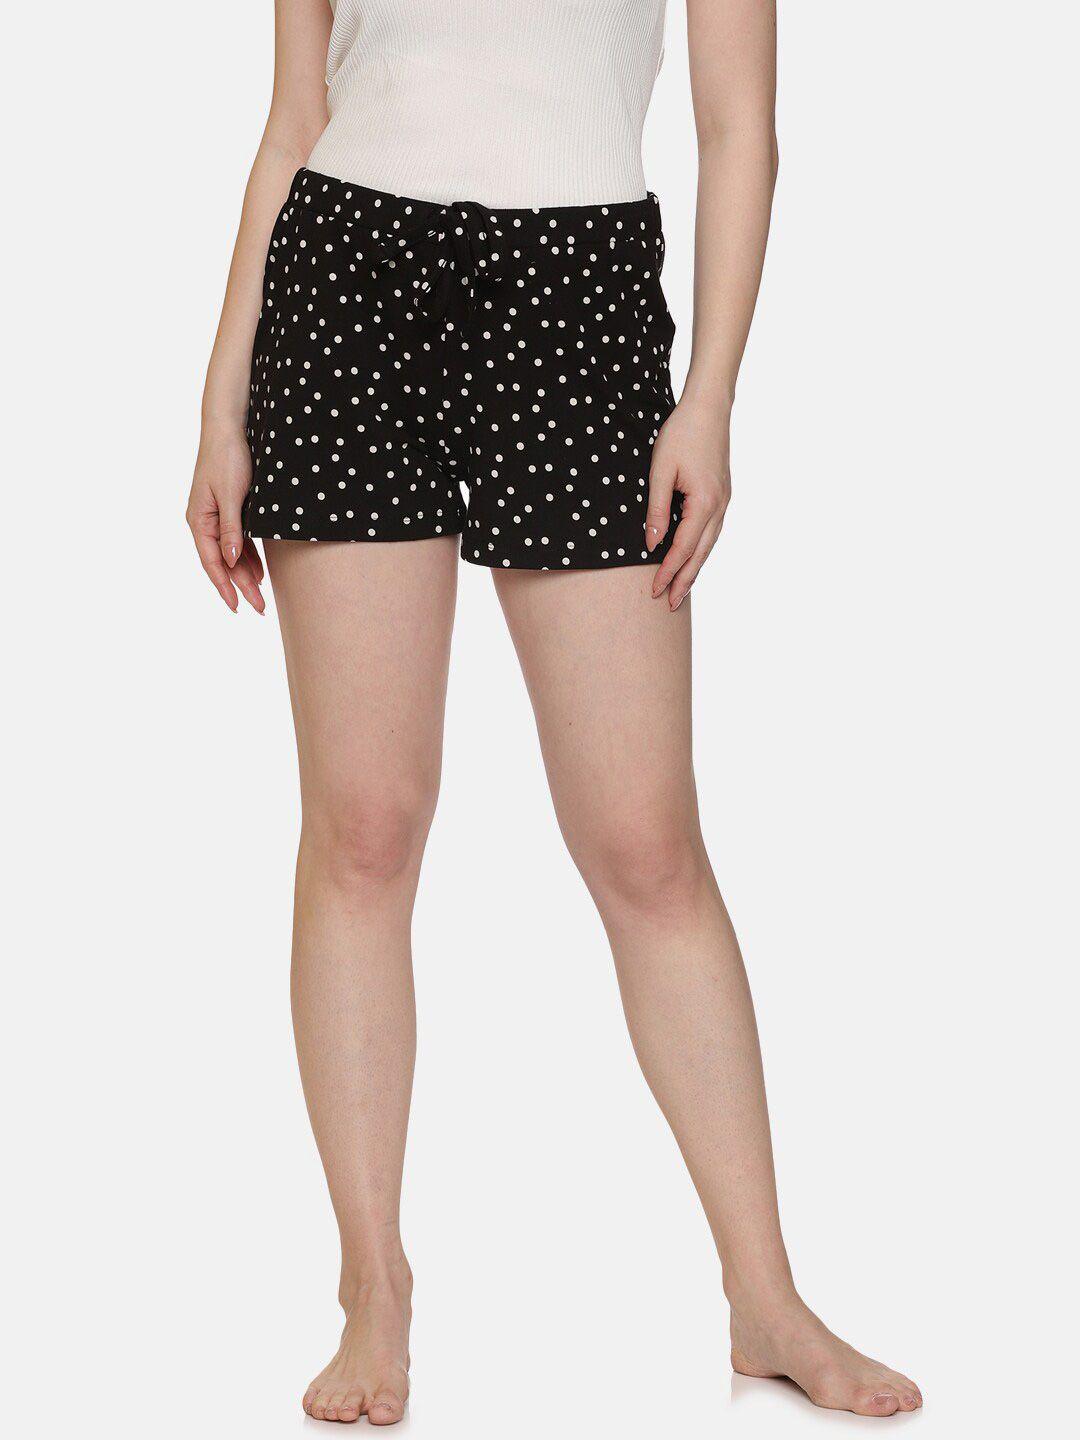 here&now-women-polka-dots-printed-mid-rise-lounge-shorts